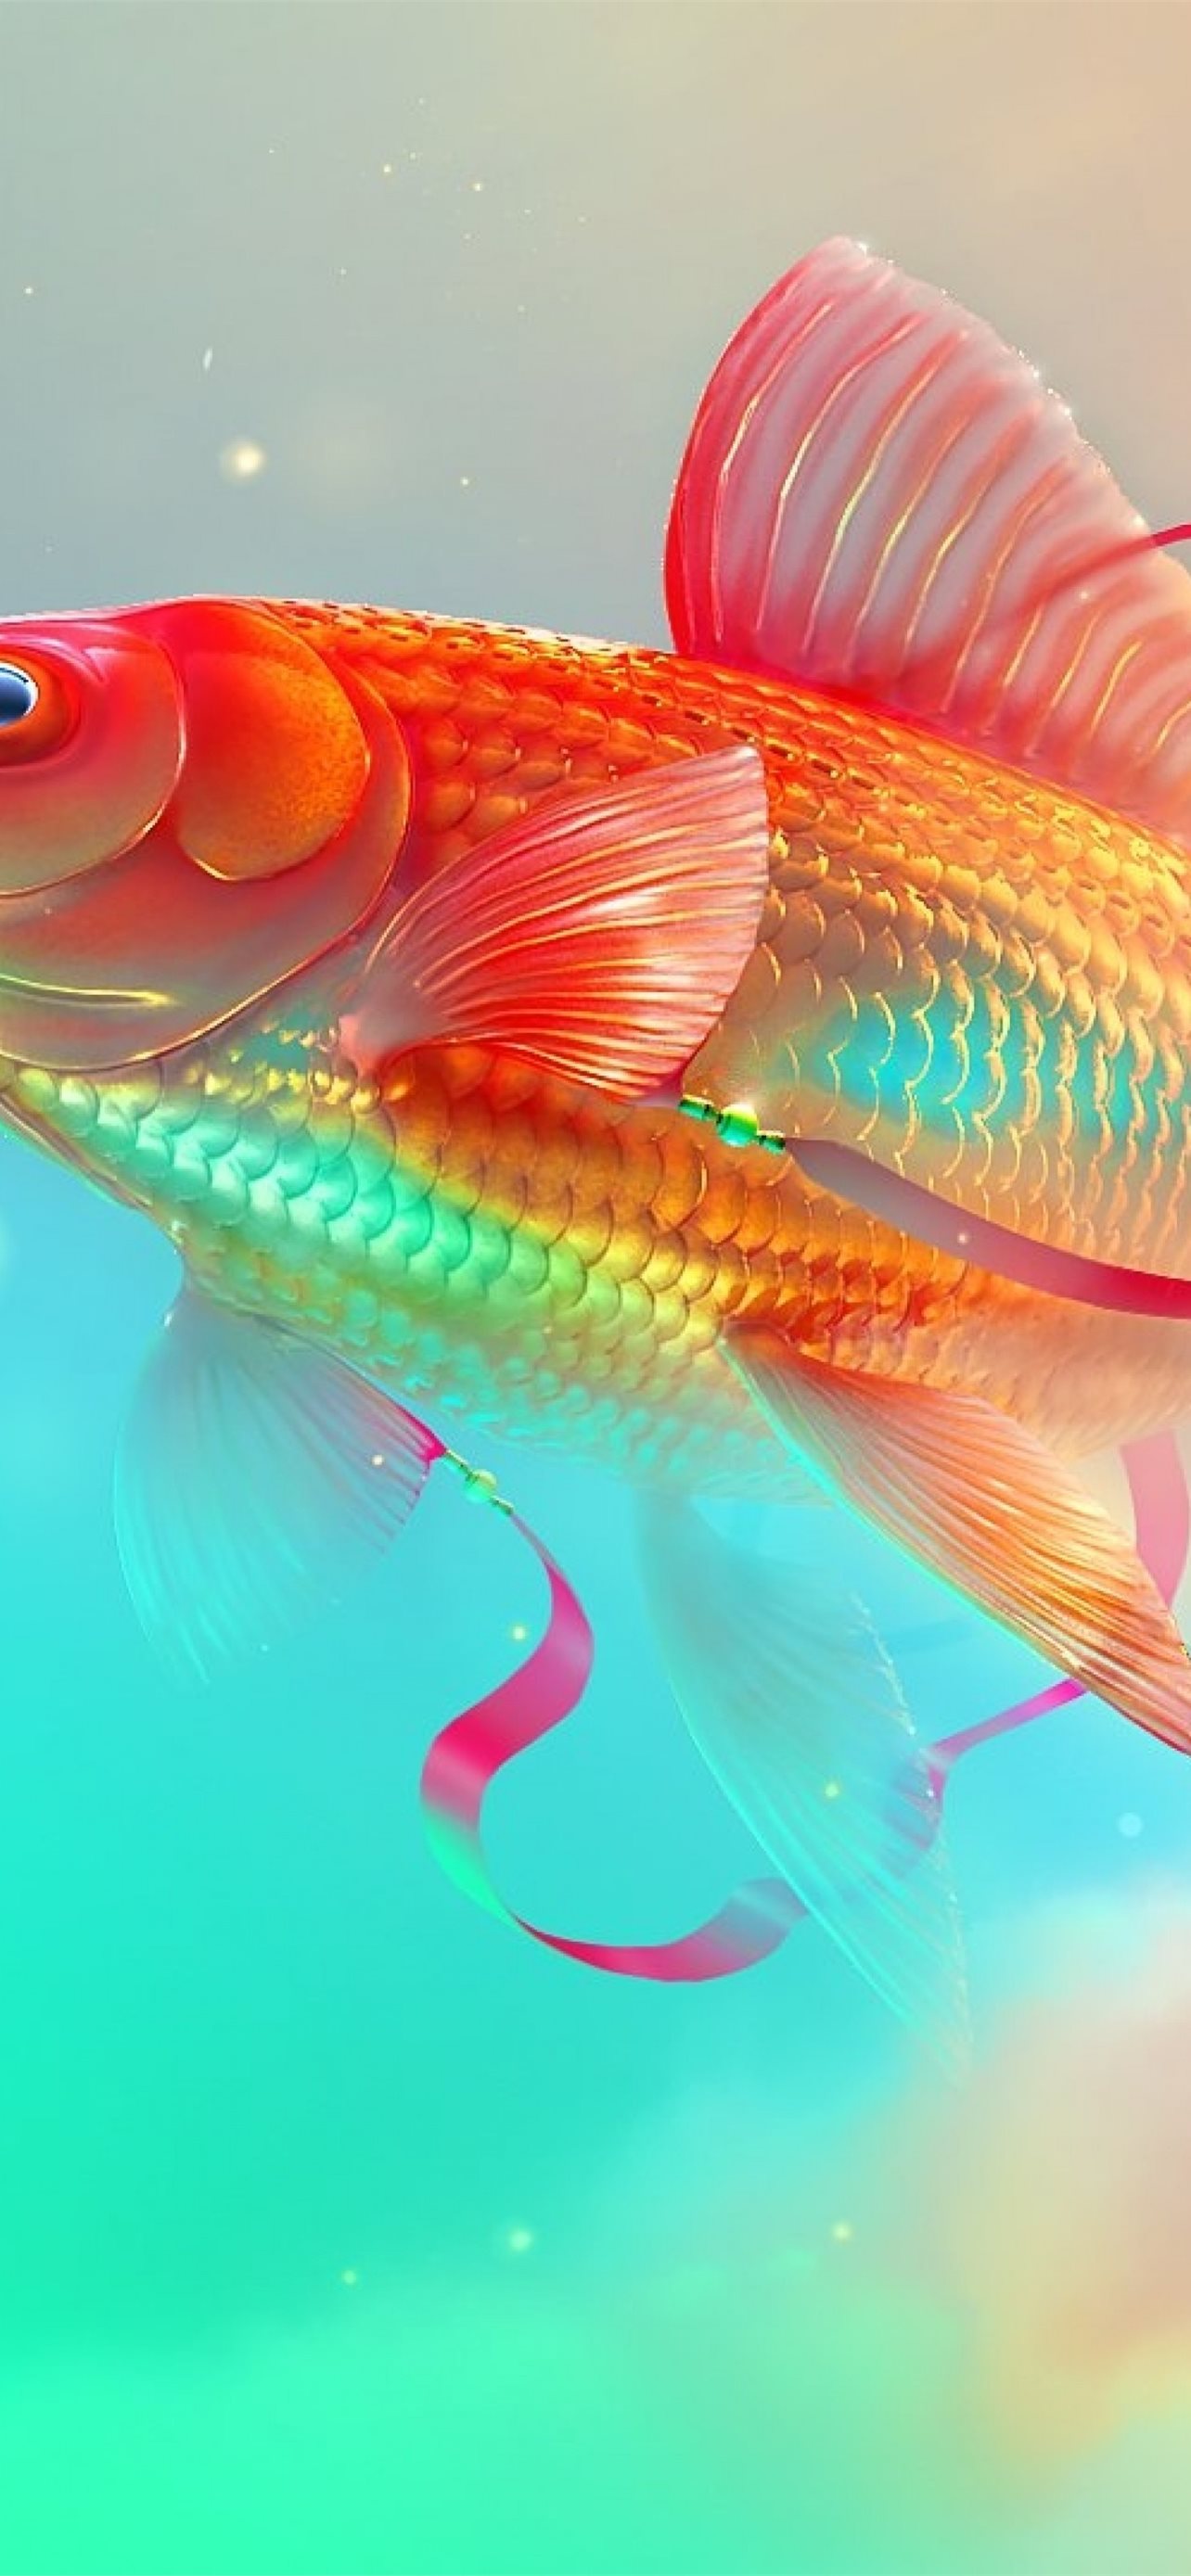 50 Goldfish wallpapers HD  Download Free backgrounds